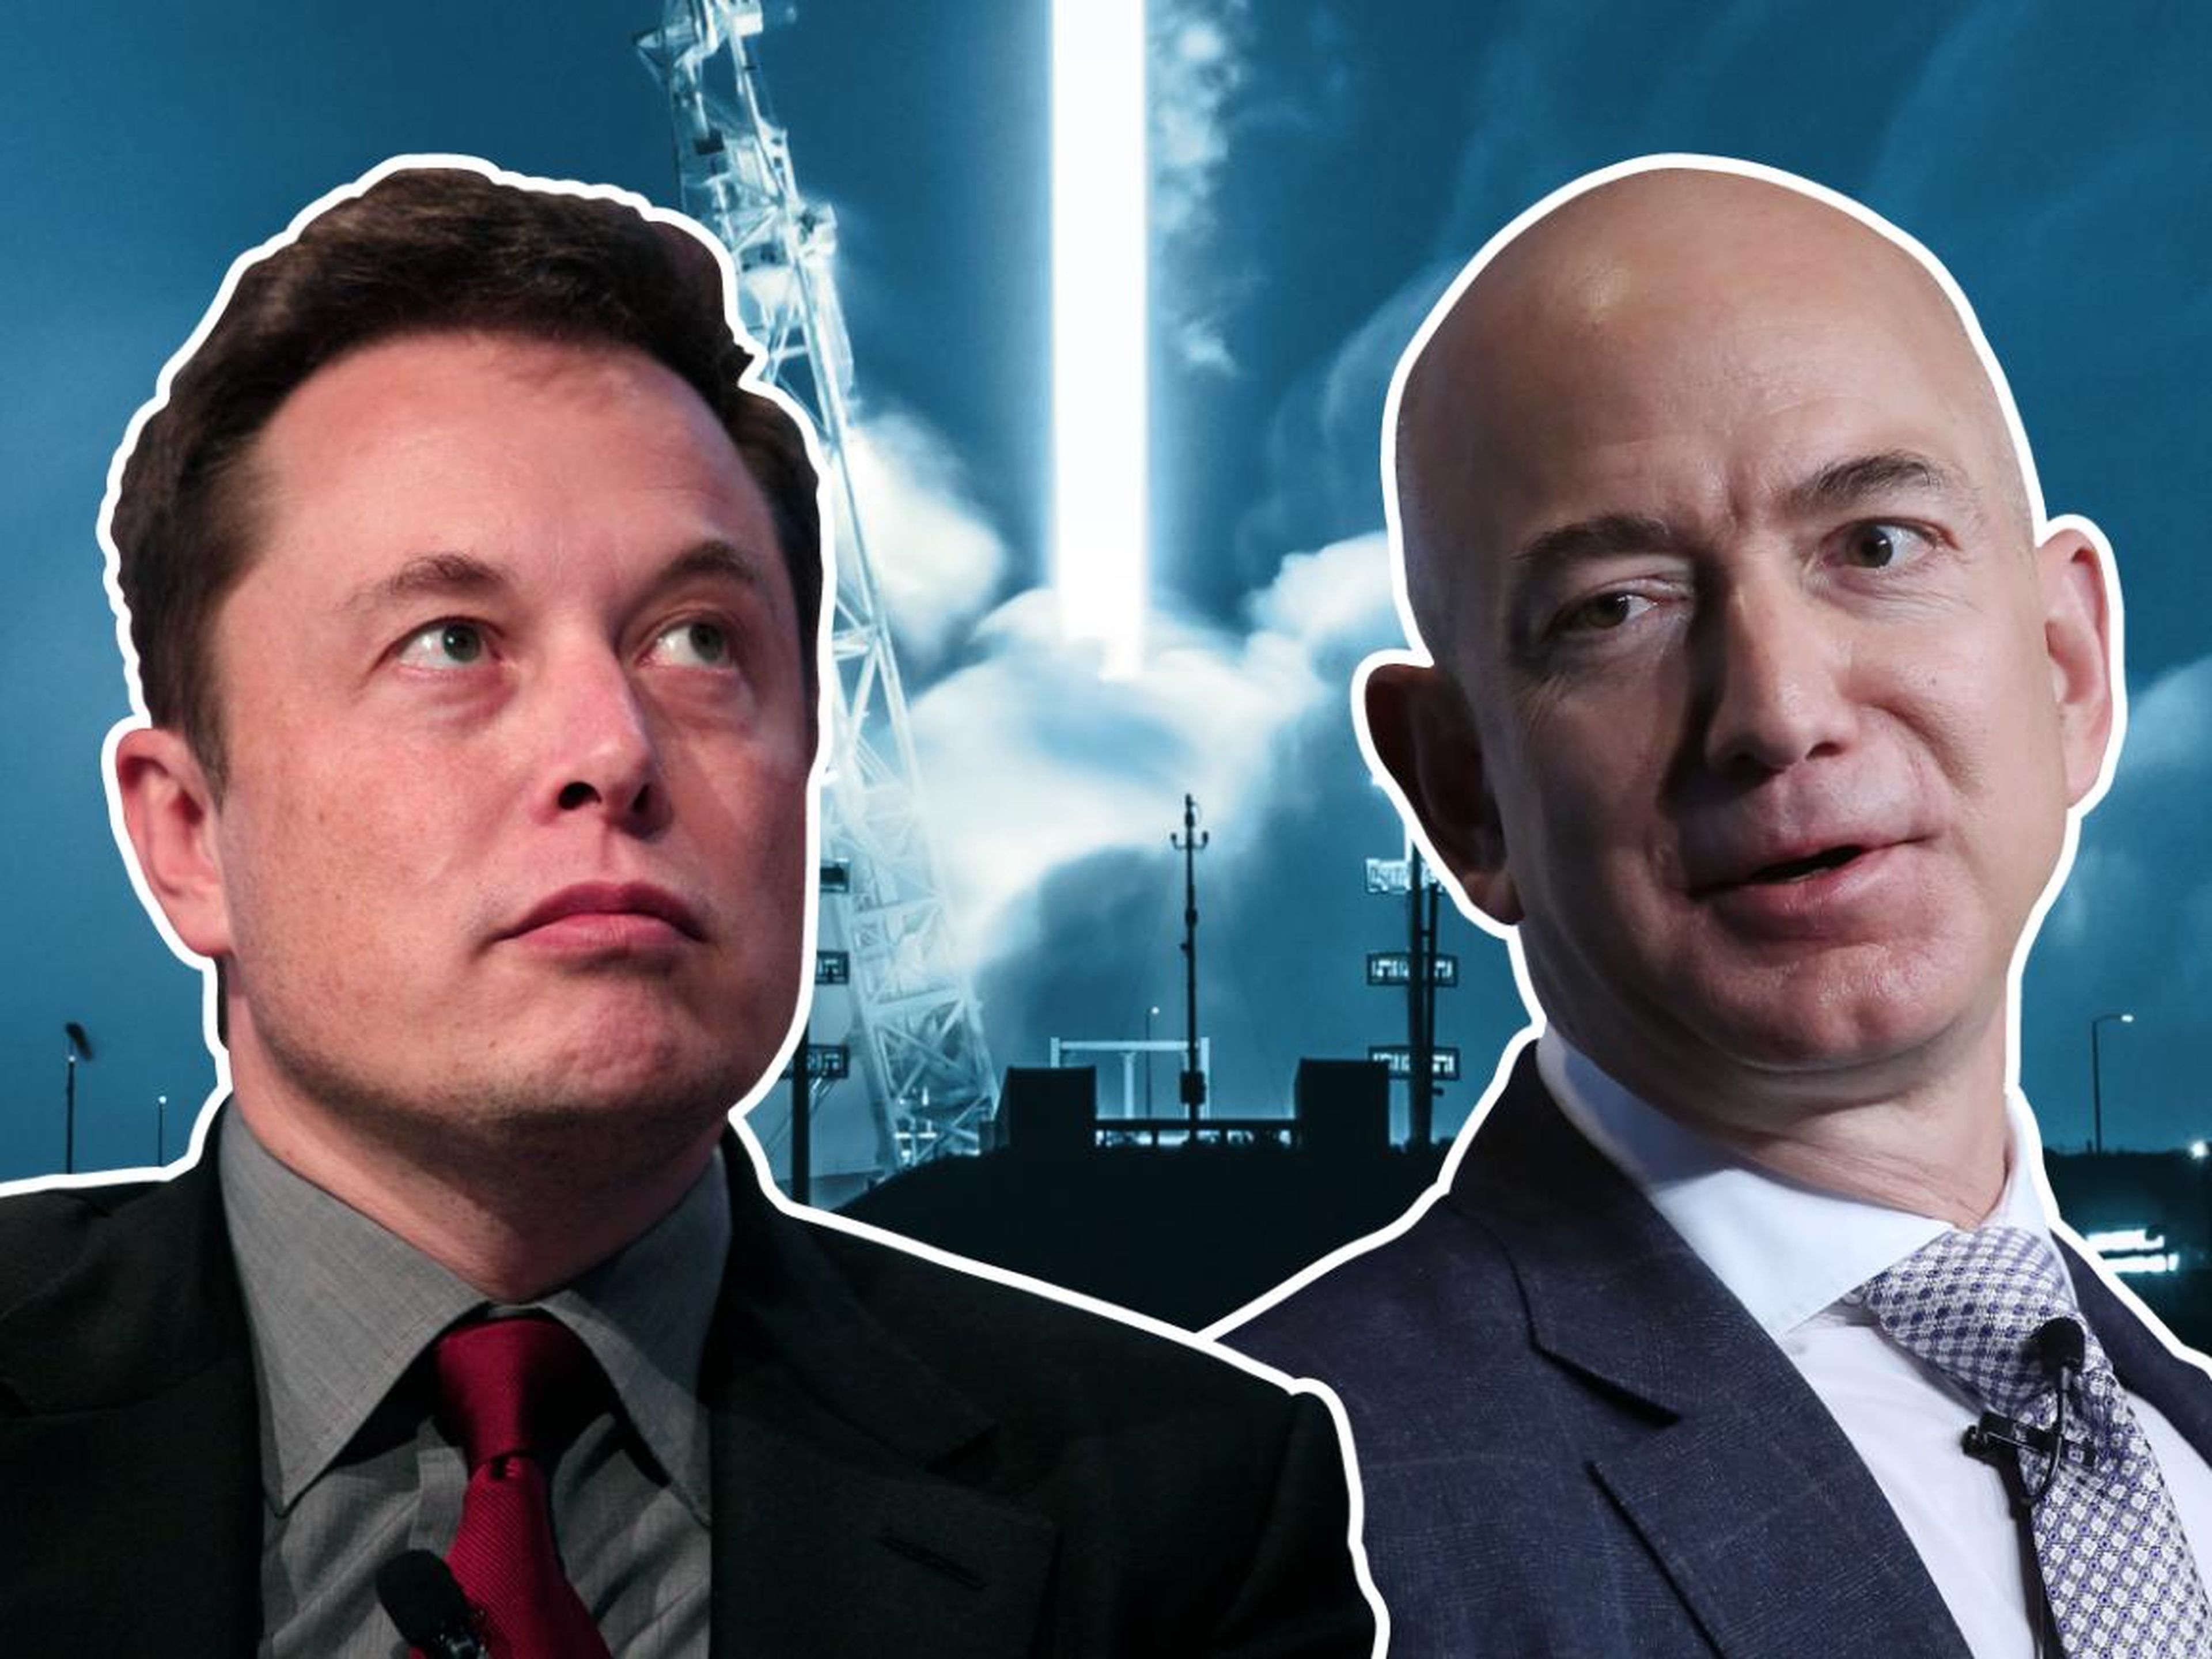 Elon Musk and Jeff Bezos both have grand plans to colonise space.